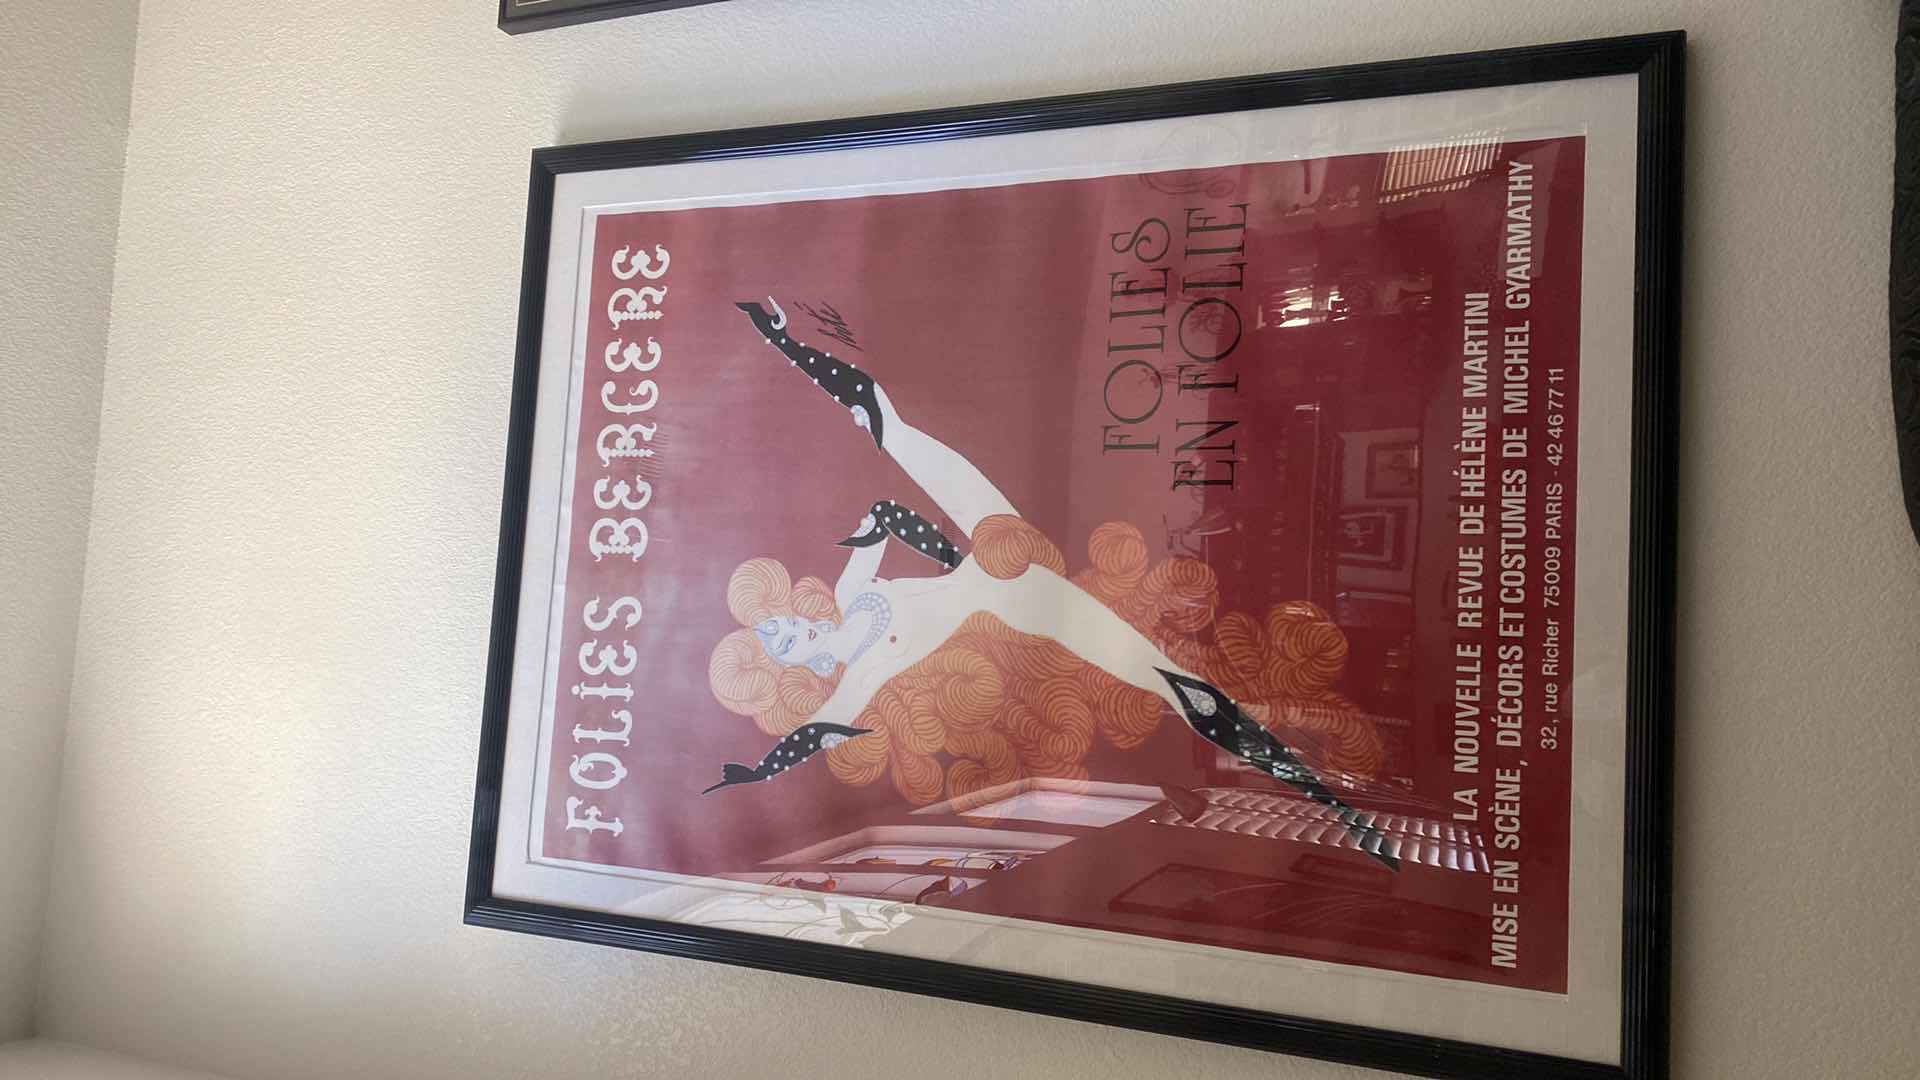 Photo 4 of FRAMED 1992 FOLIES BERGERE POSTER ON CLOTH ARTWORK 48“ x 64“